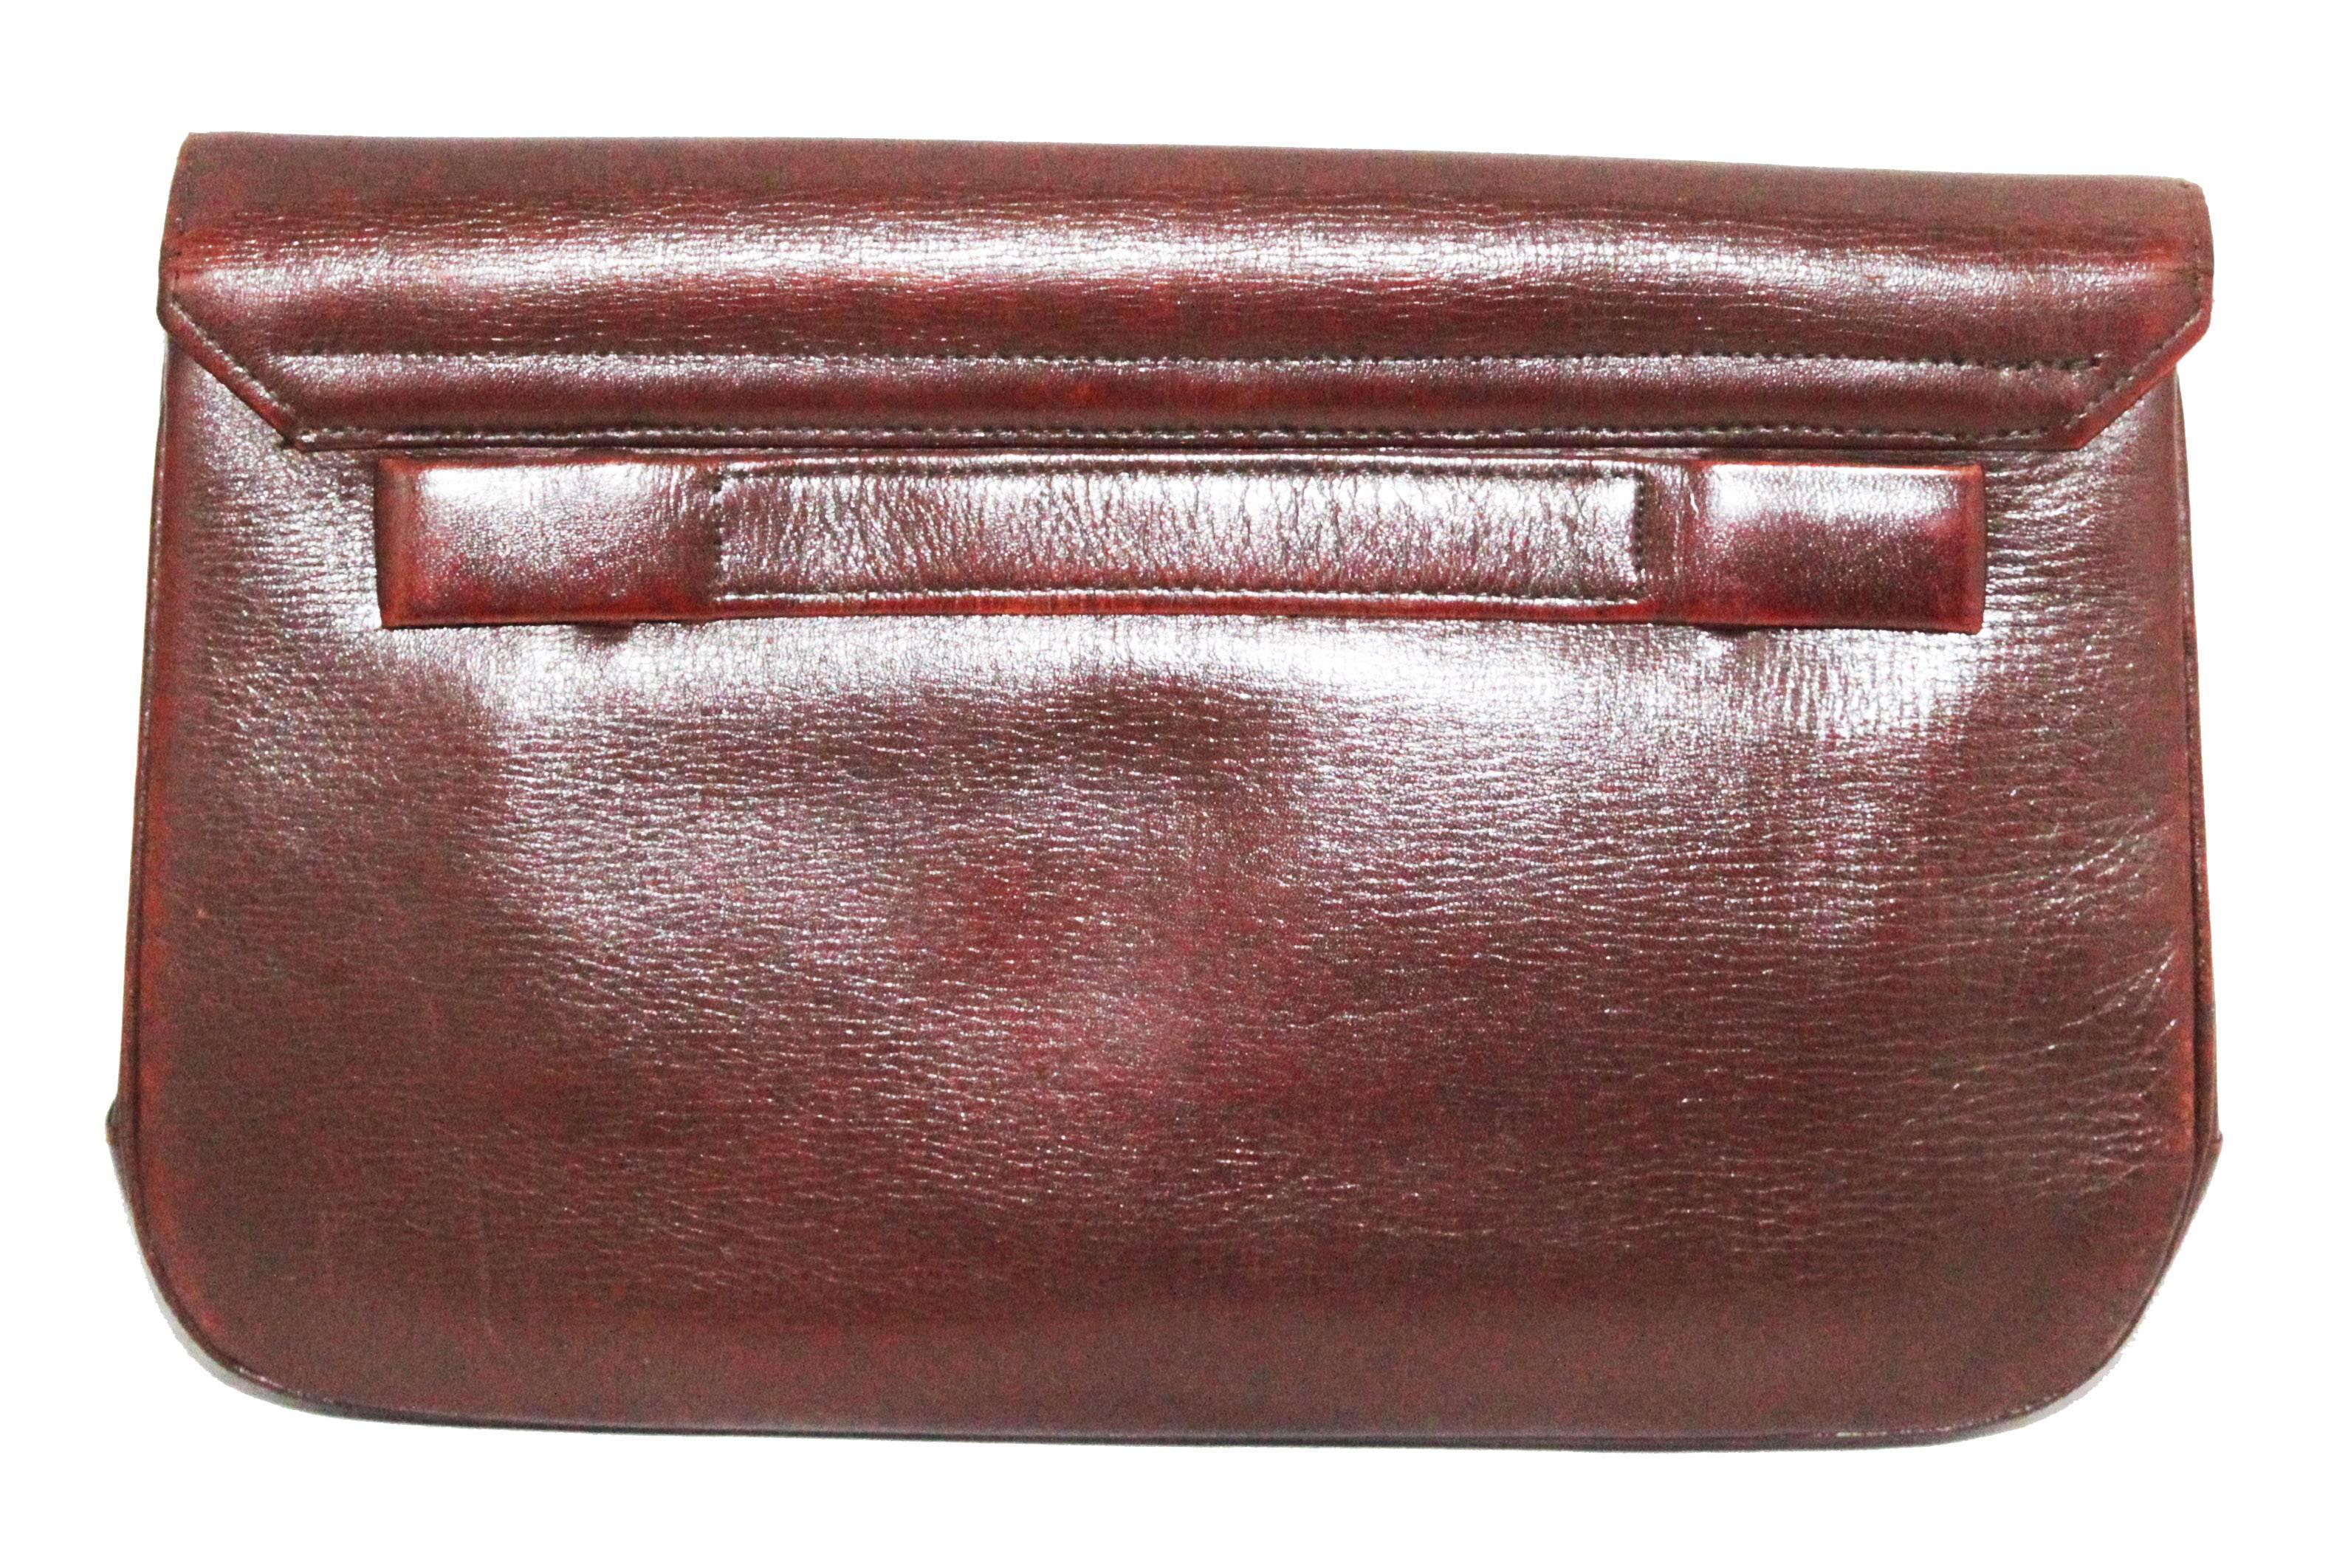 Stylish & unique design for this 40s brown leather clutch. Made of leather, fabric lining. 

Size : 26 x 15 cm - 10.2 x 6 in. 

Excellent vintage condition.  